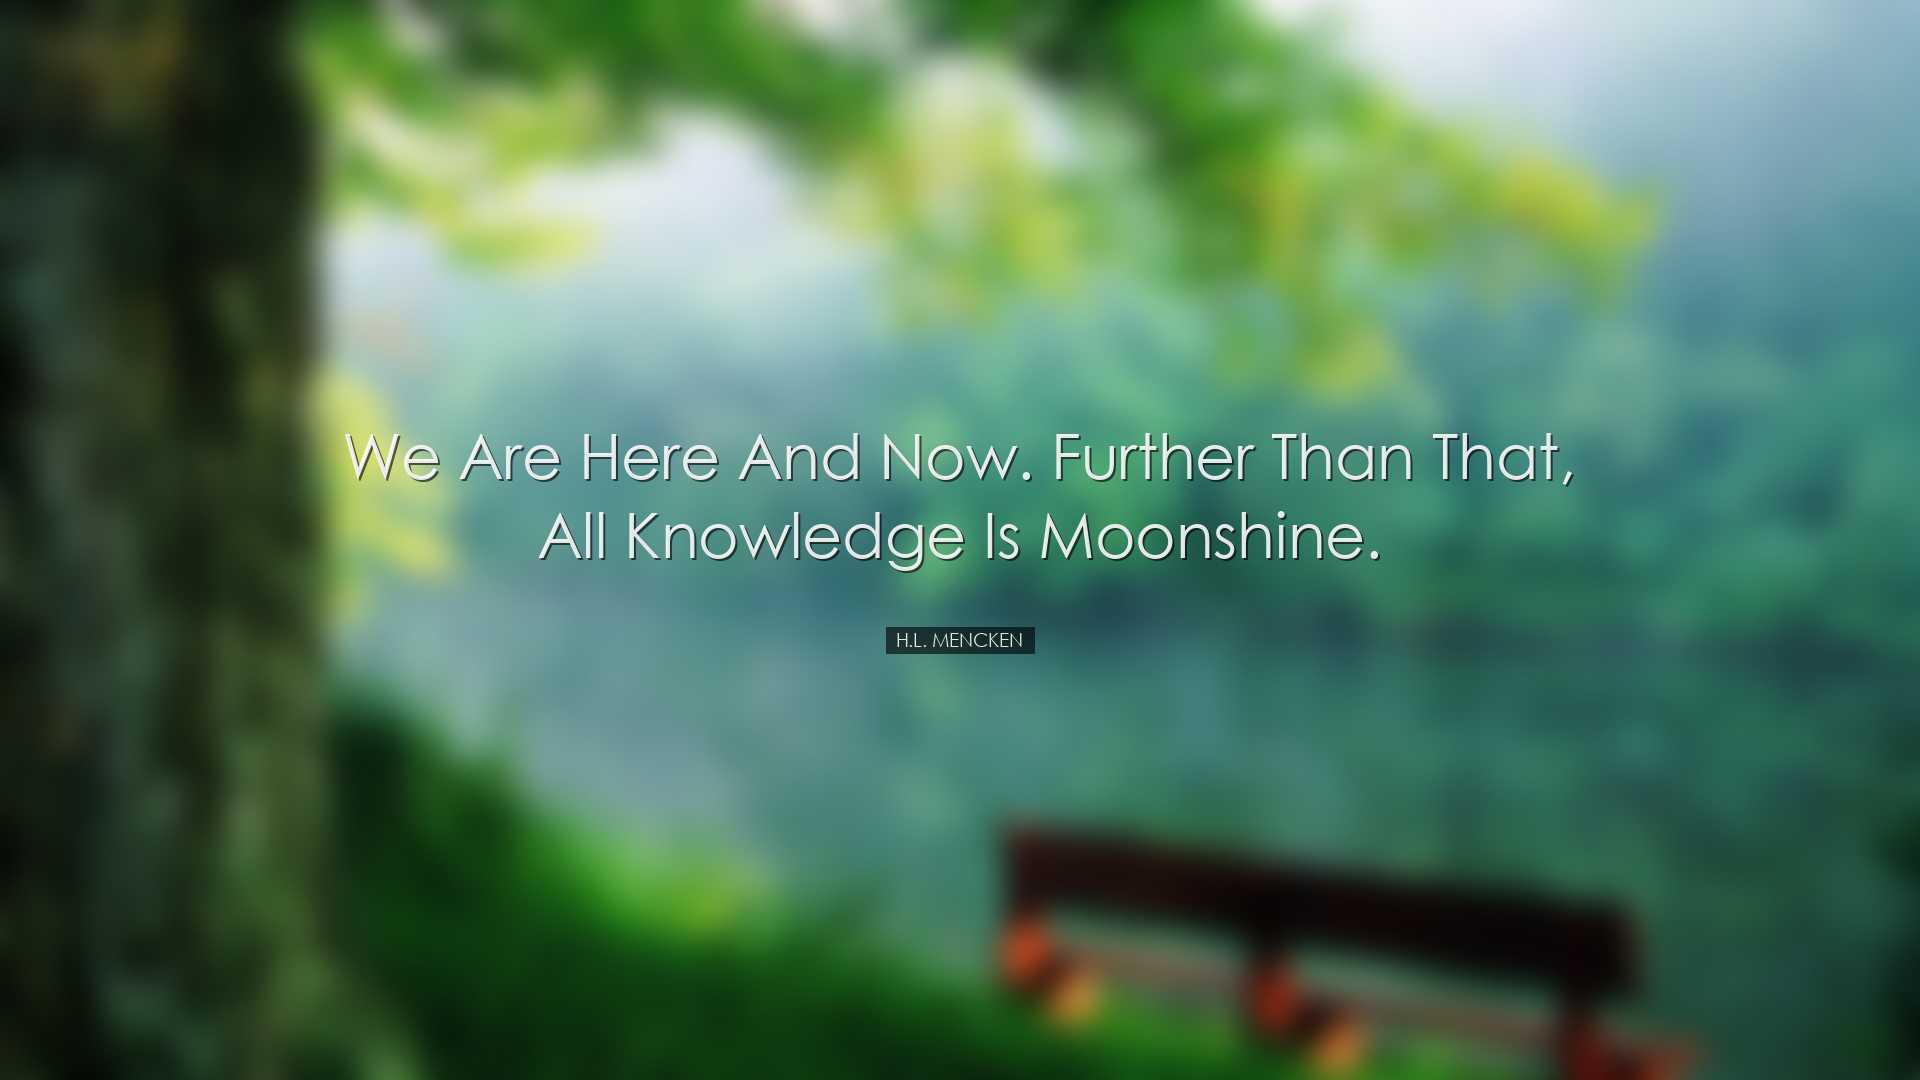 We are here and now. Further than that, all knowledge is moonshine